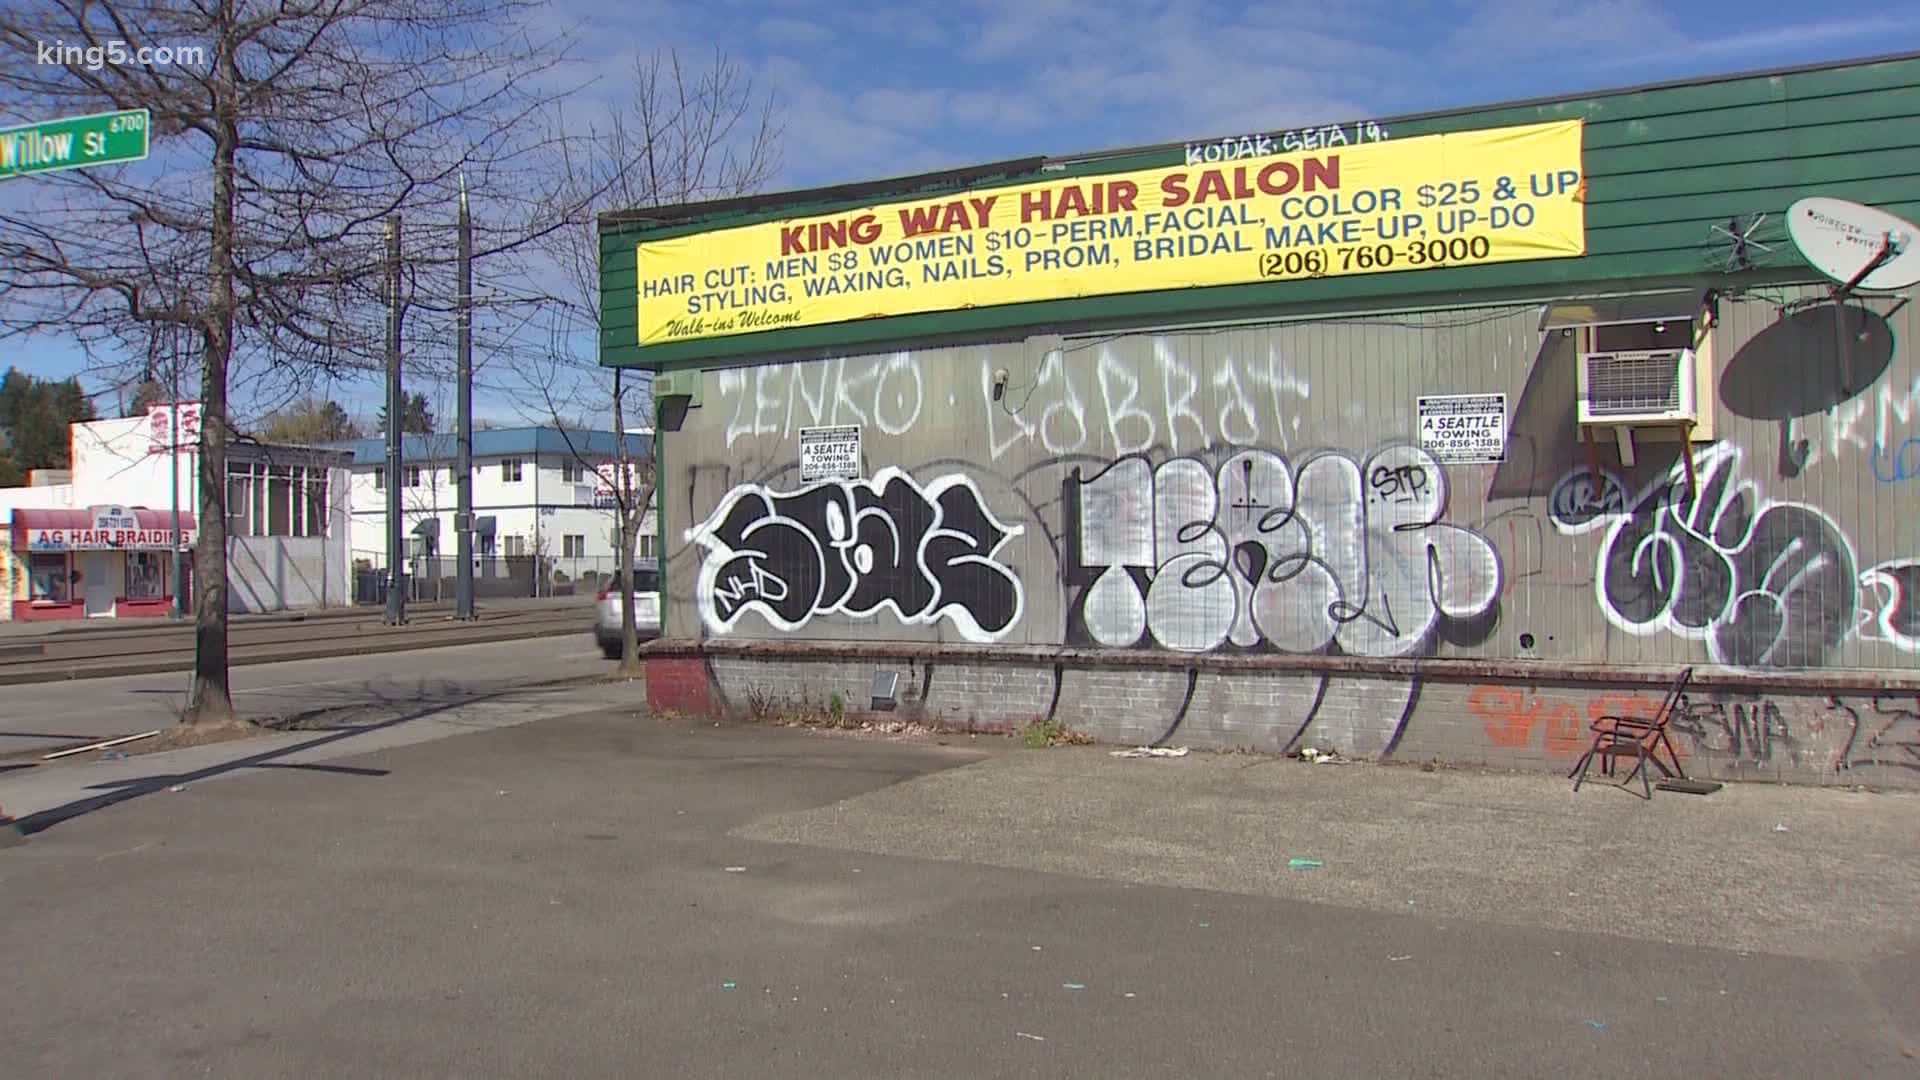 Some Seattle businesses that have been closed since Gov. Inslee's stay-at-home order was issued are now dealing with a new problem: vandals and graffiti.